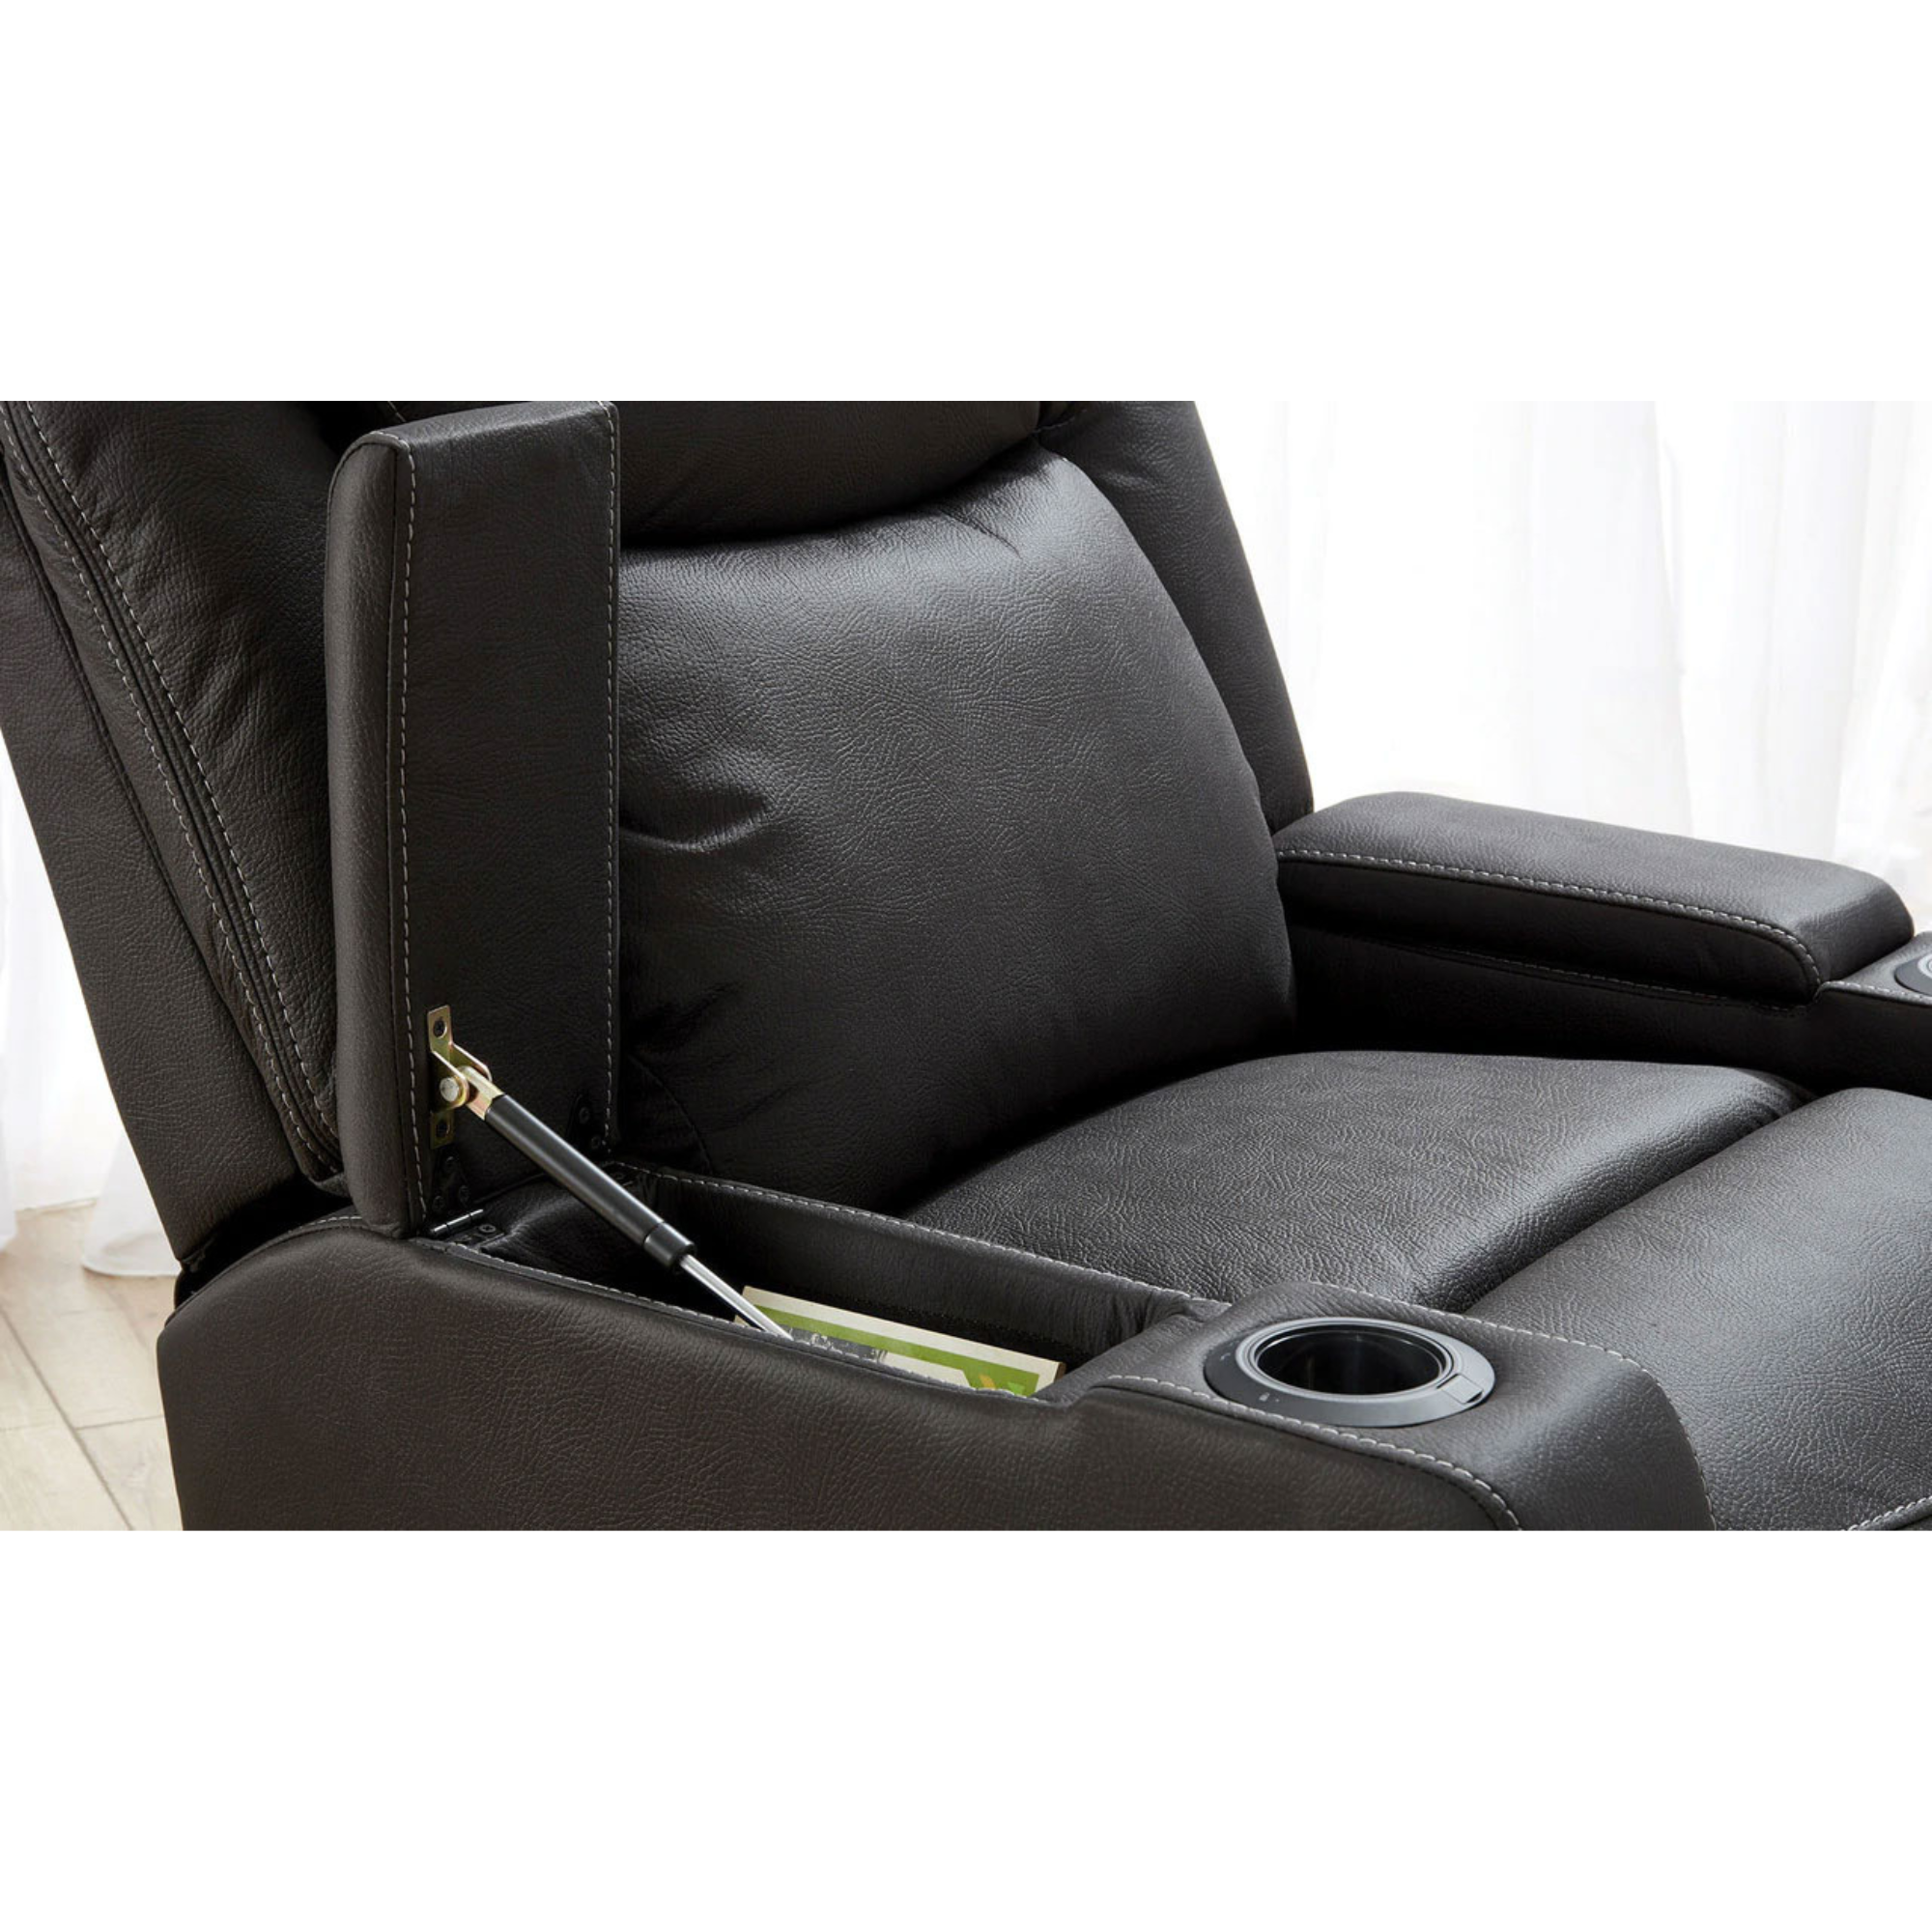 EXCALIBUR SUPER SUEDE ELECTRIC 3 SEATER or 2 SEATER or RECLINER - EACH PIECE SOLD SEPARATELY